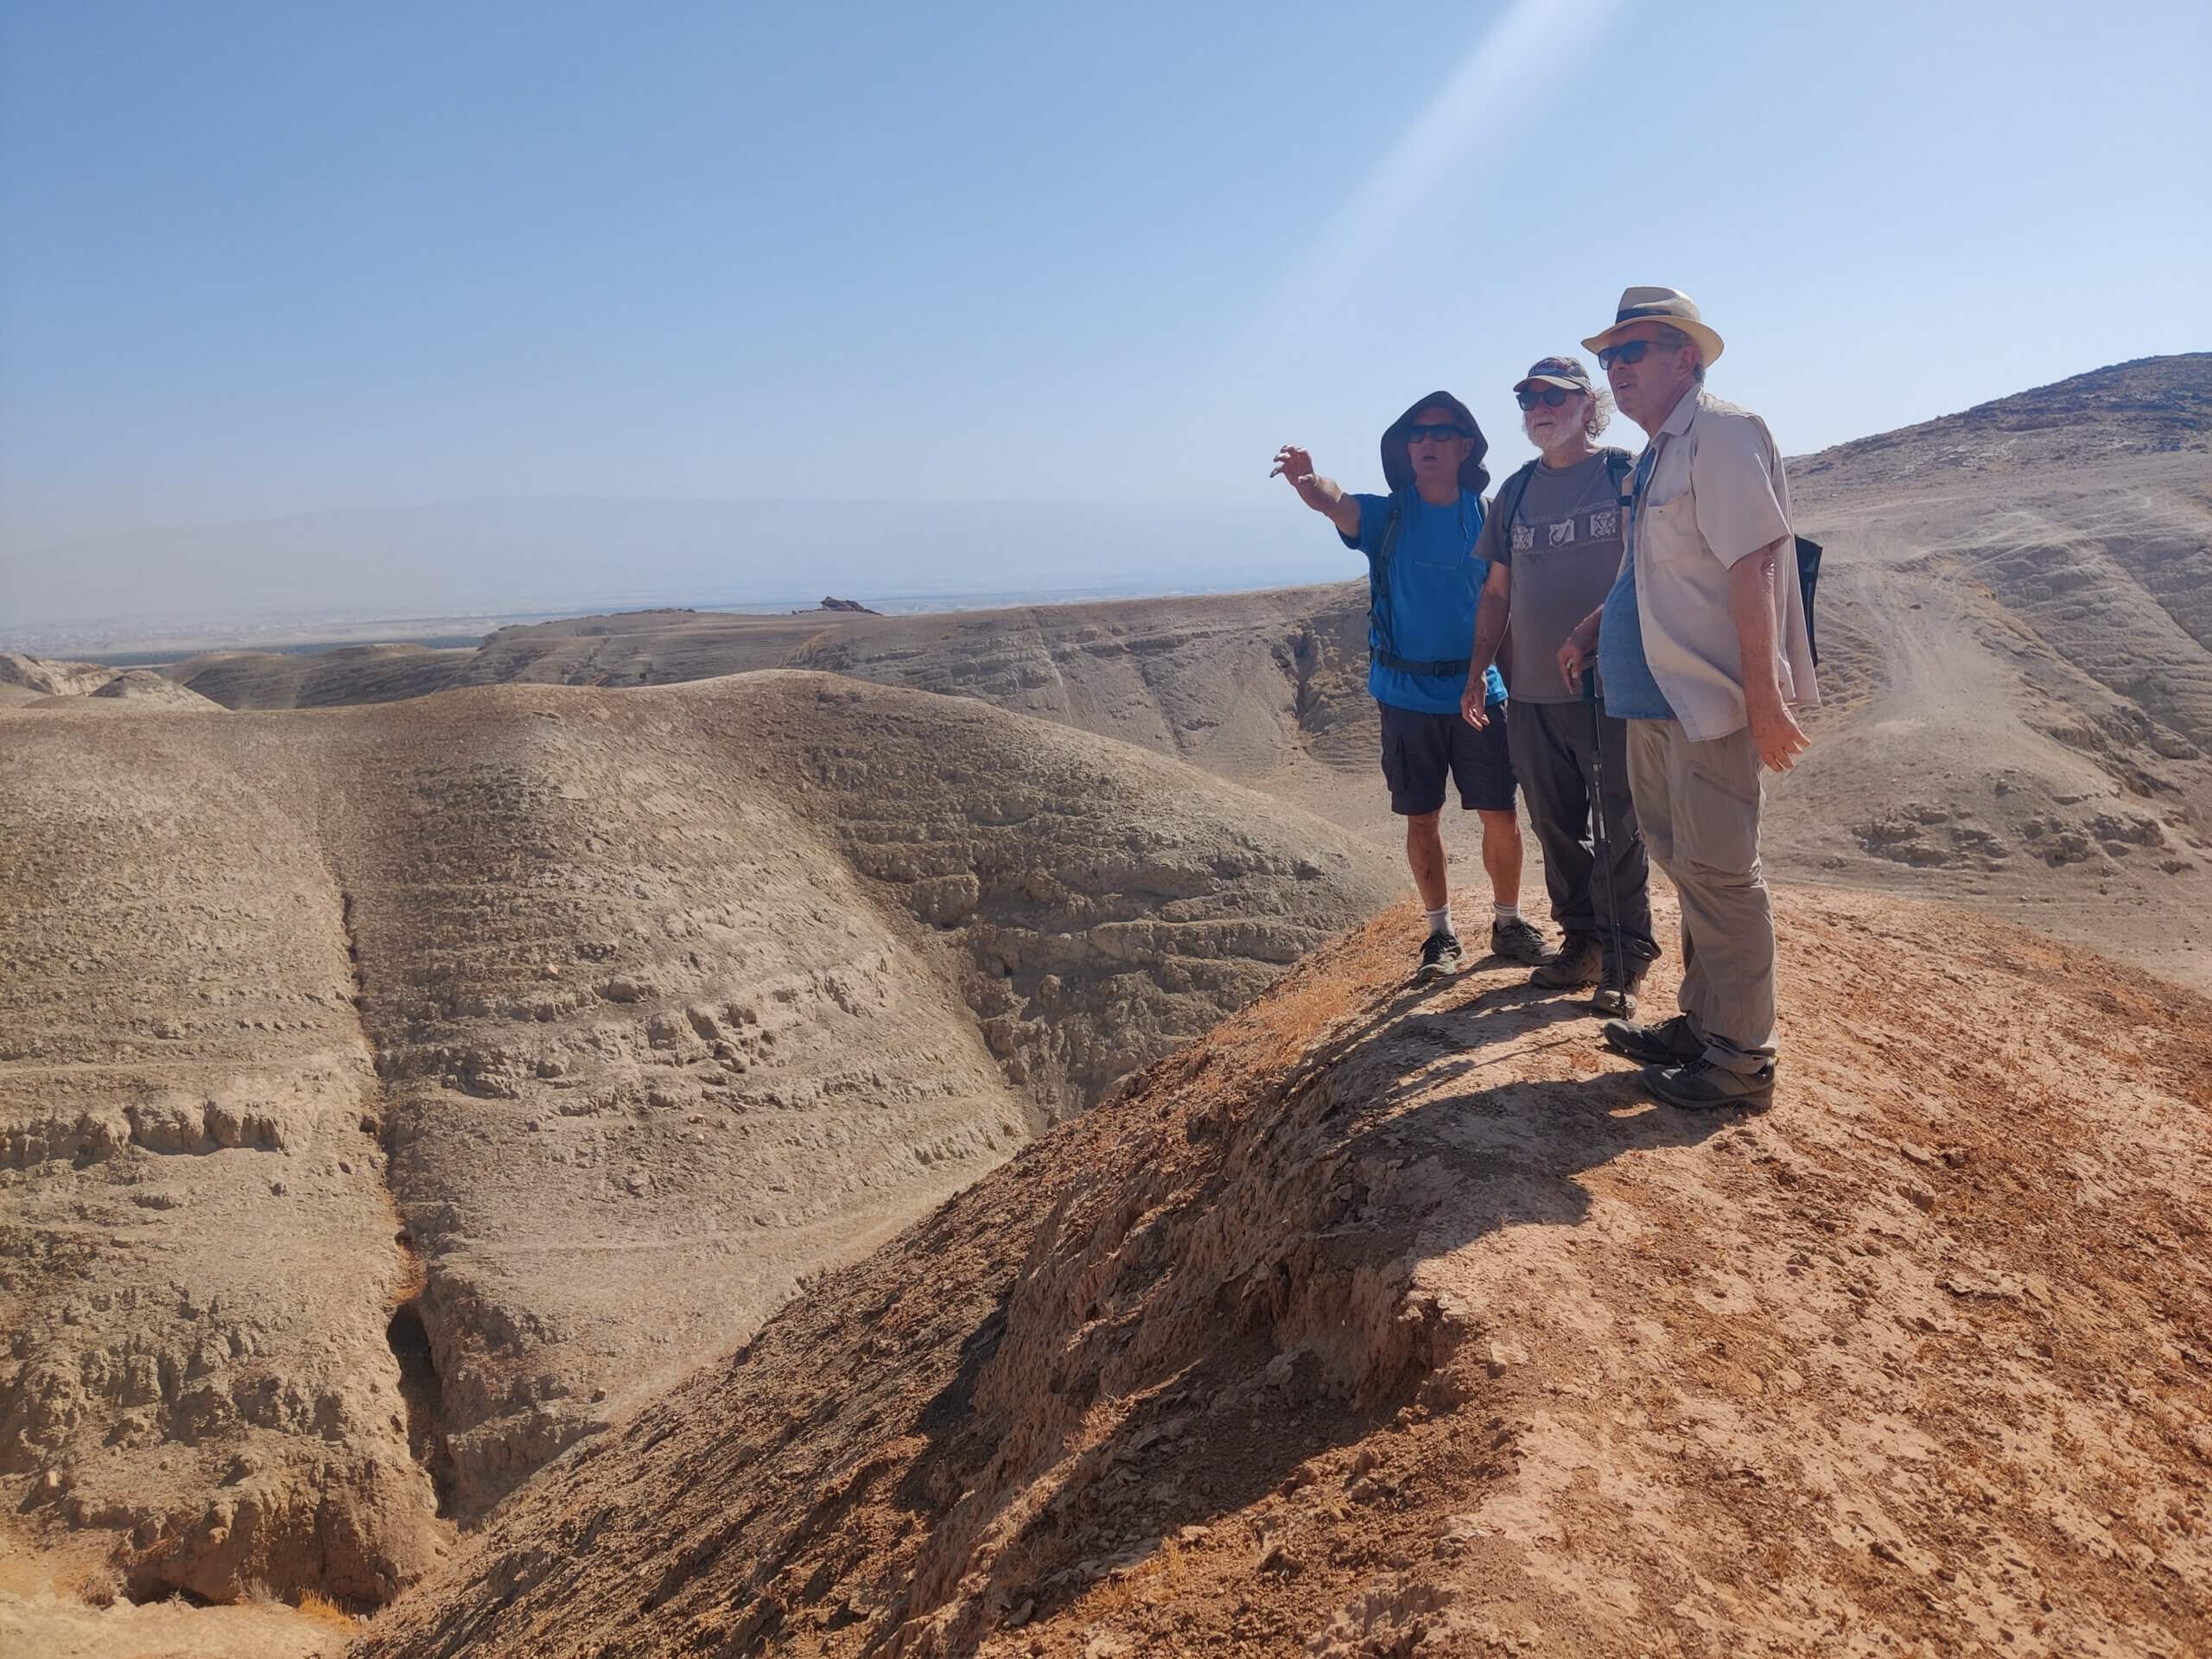 The researchers examine the terraces in the Jordan Valley